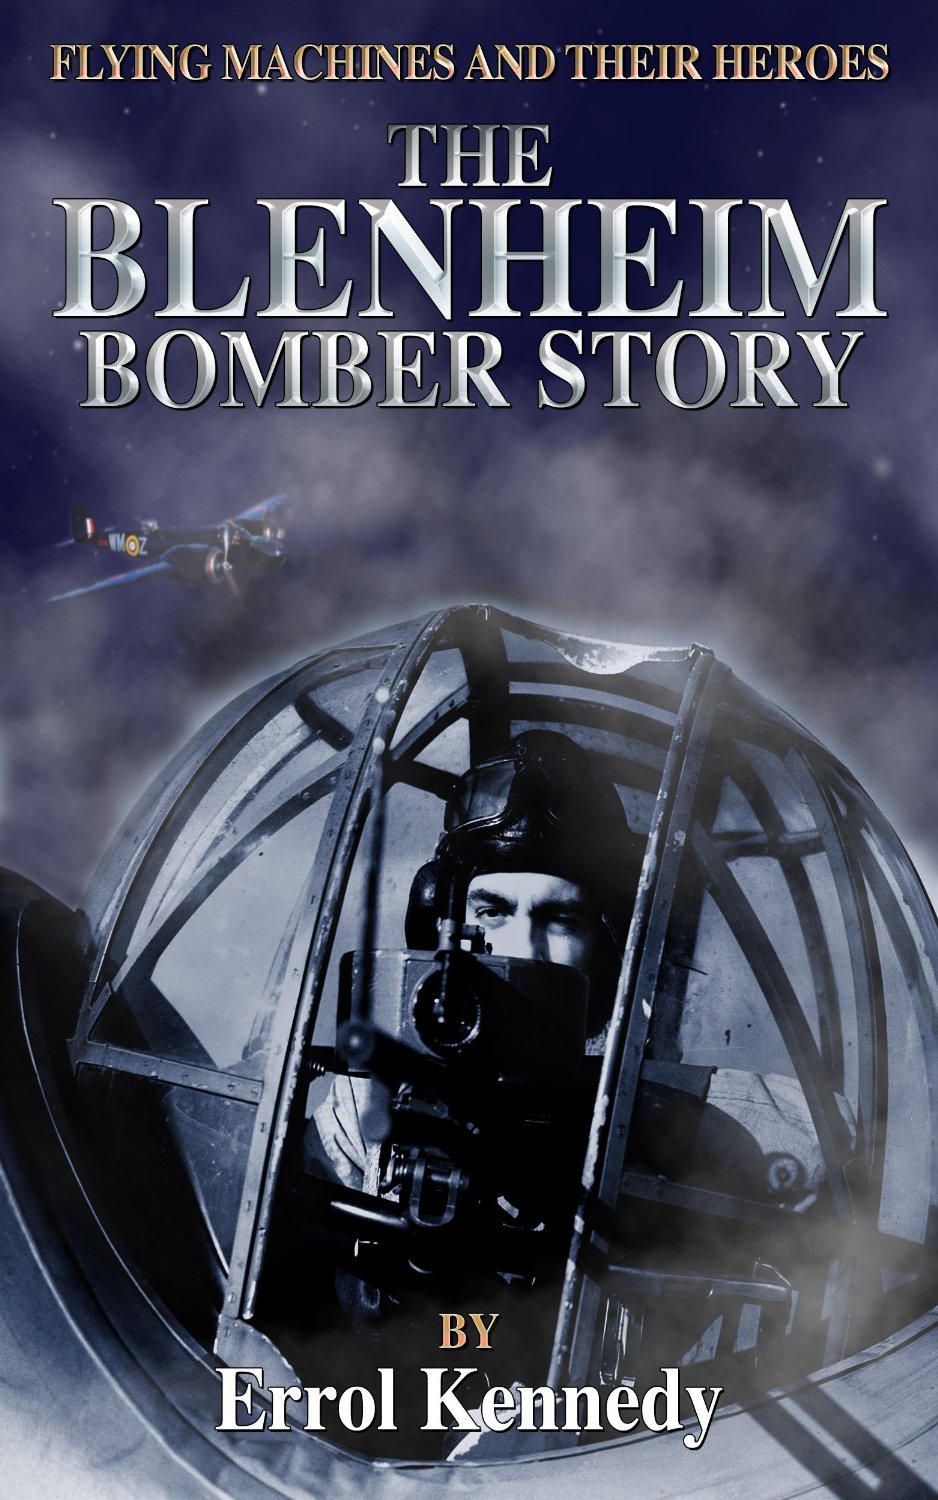 The Blenheim Bomber Story (Flying Machines And Their Heroes Book 1)